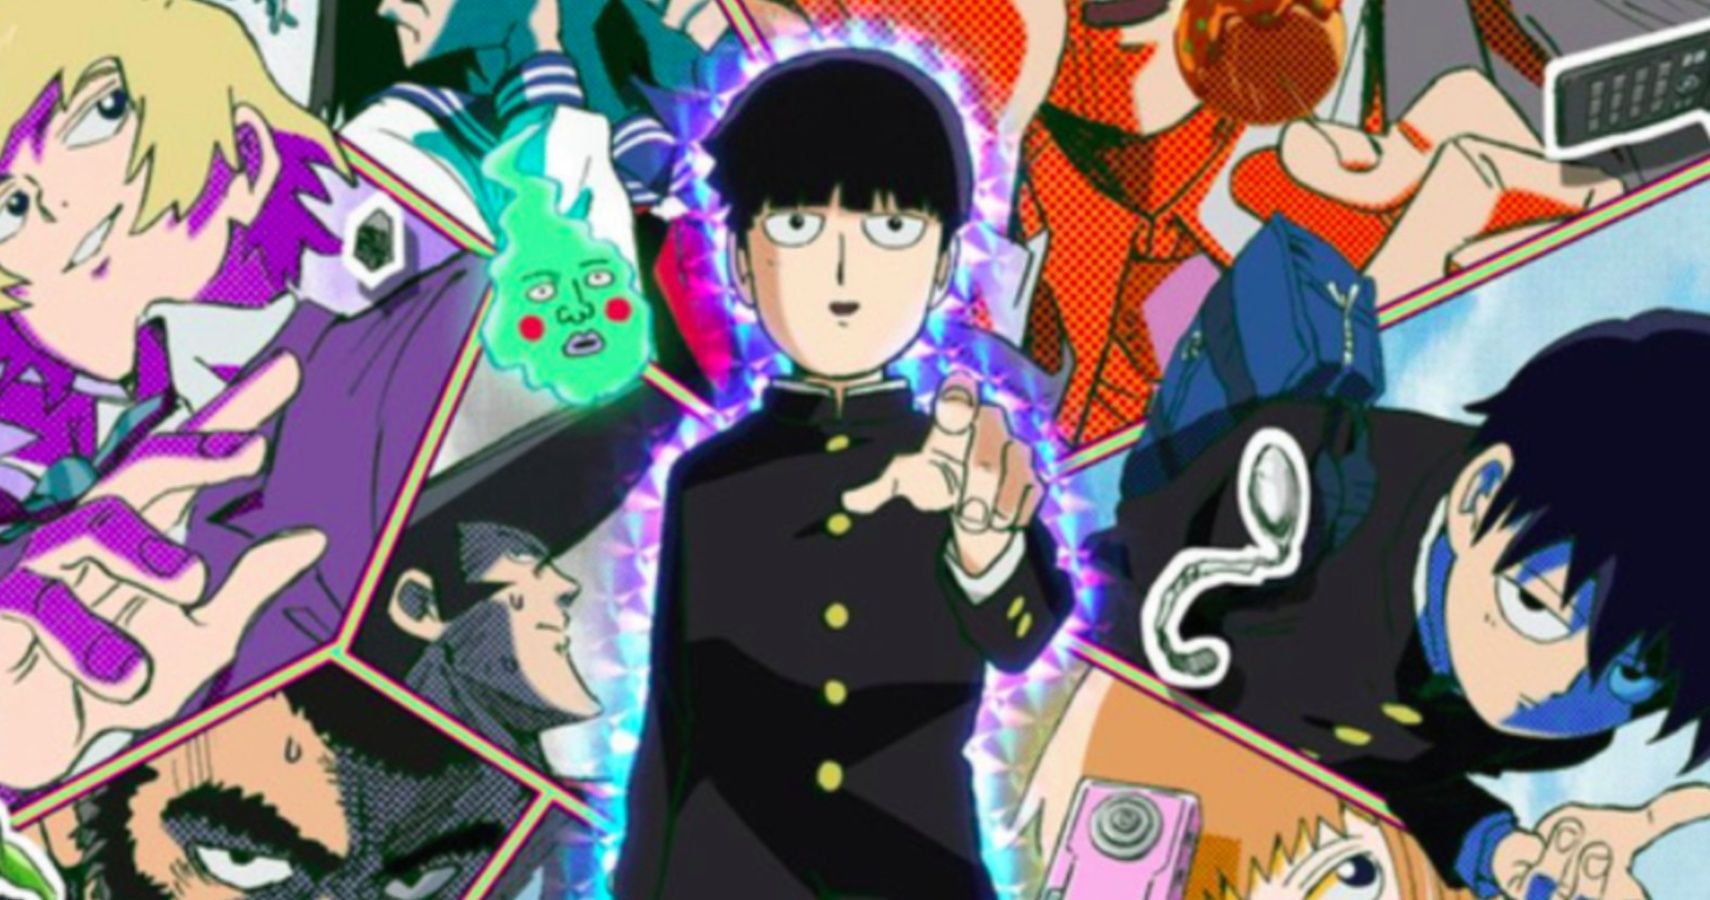 Mob Psycho 100: 10 Hidden Details You Might Have Missed